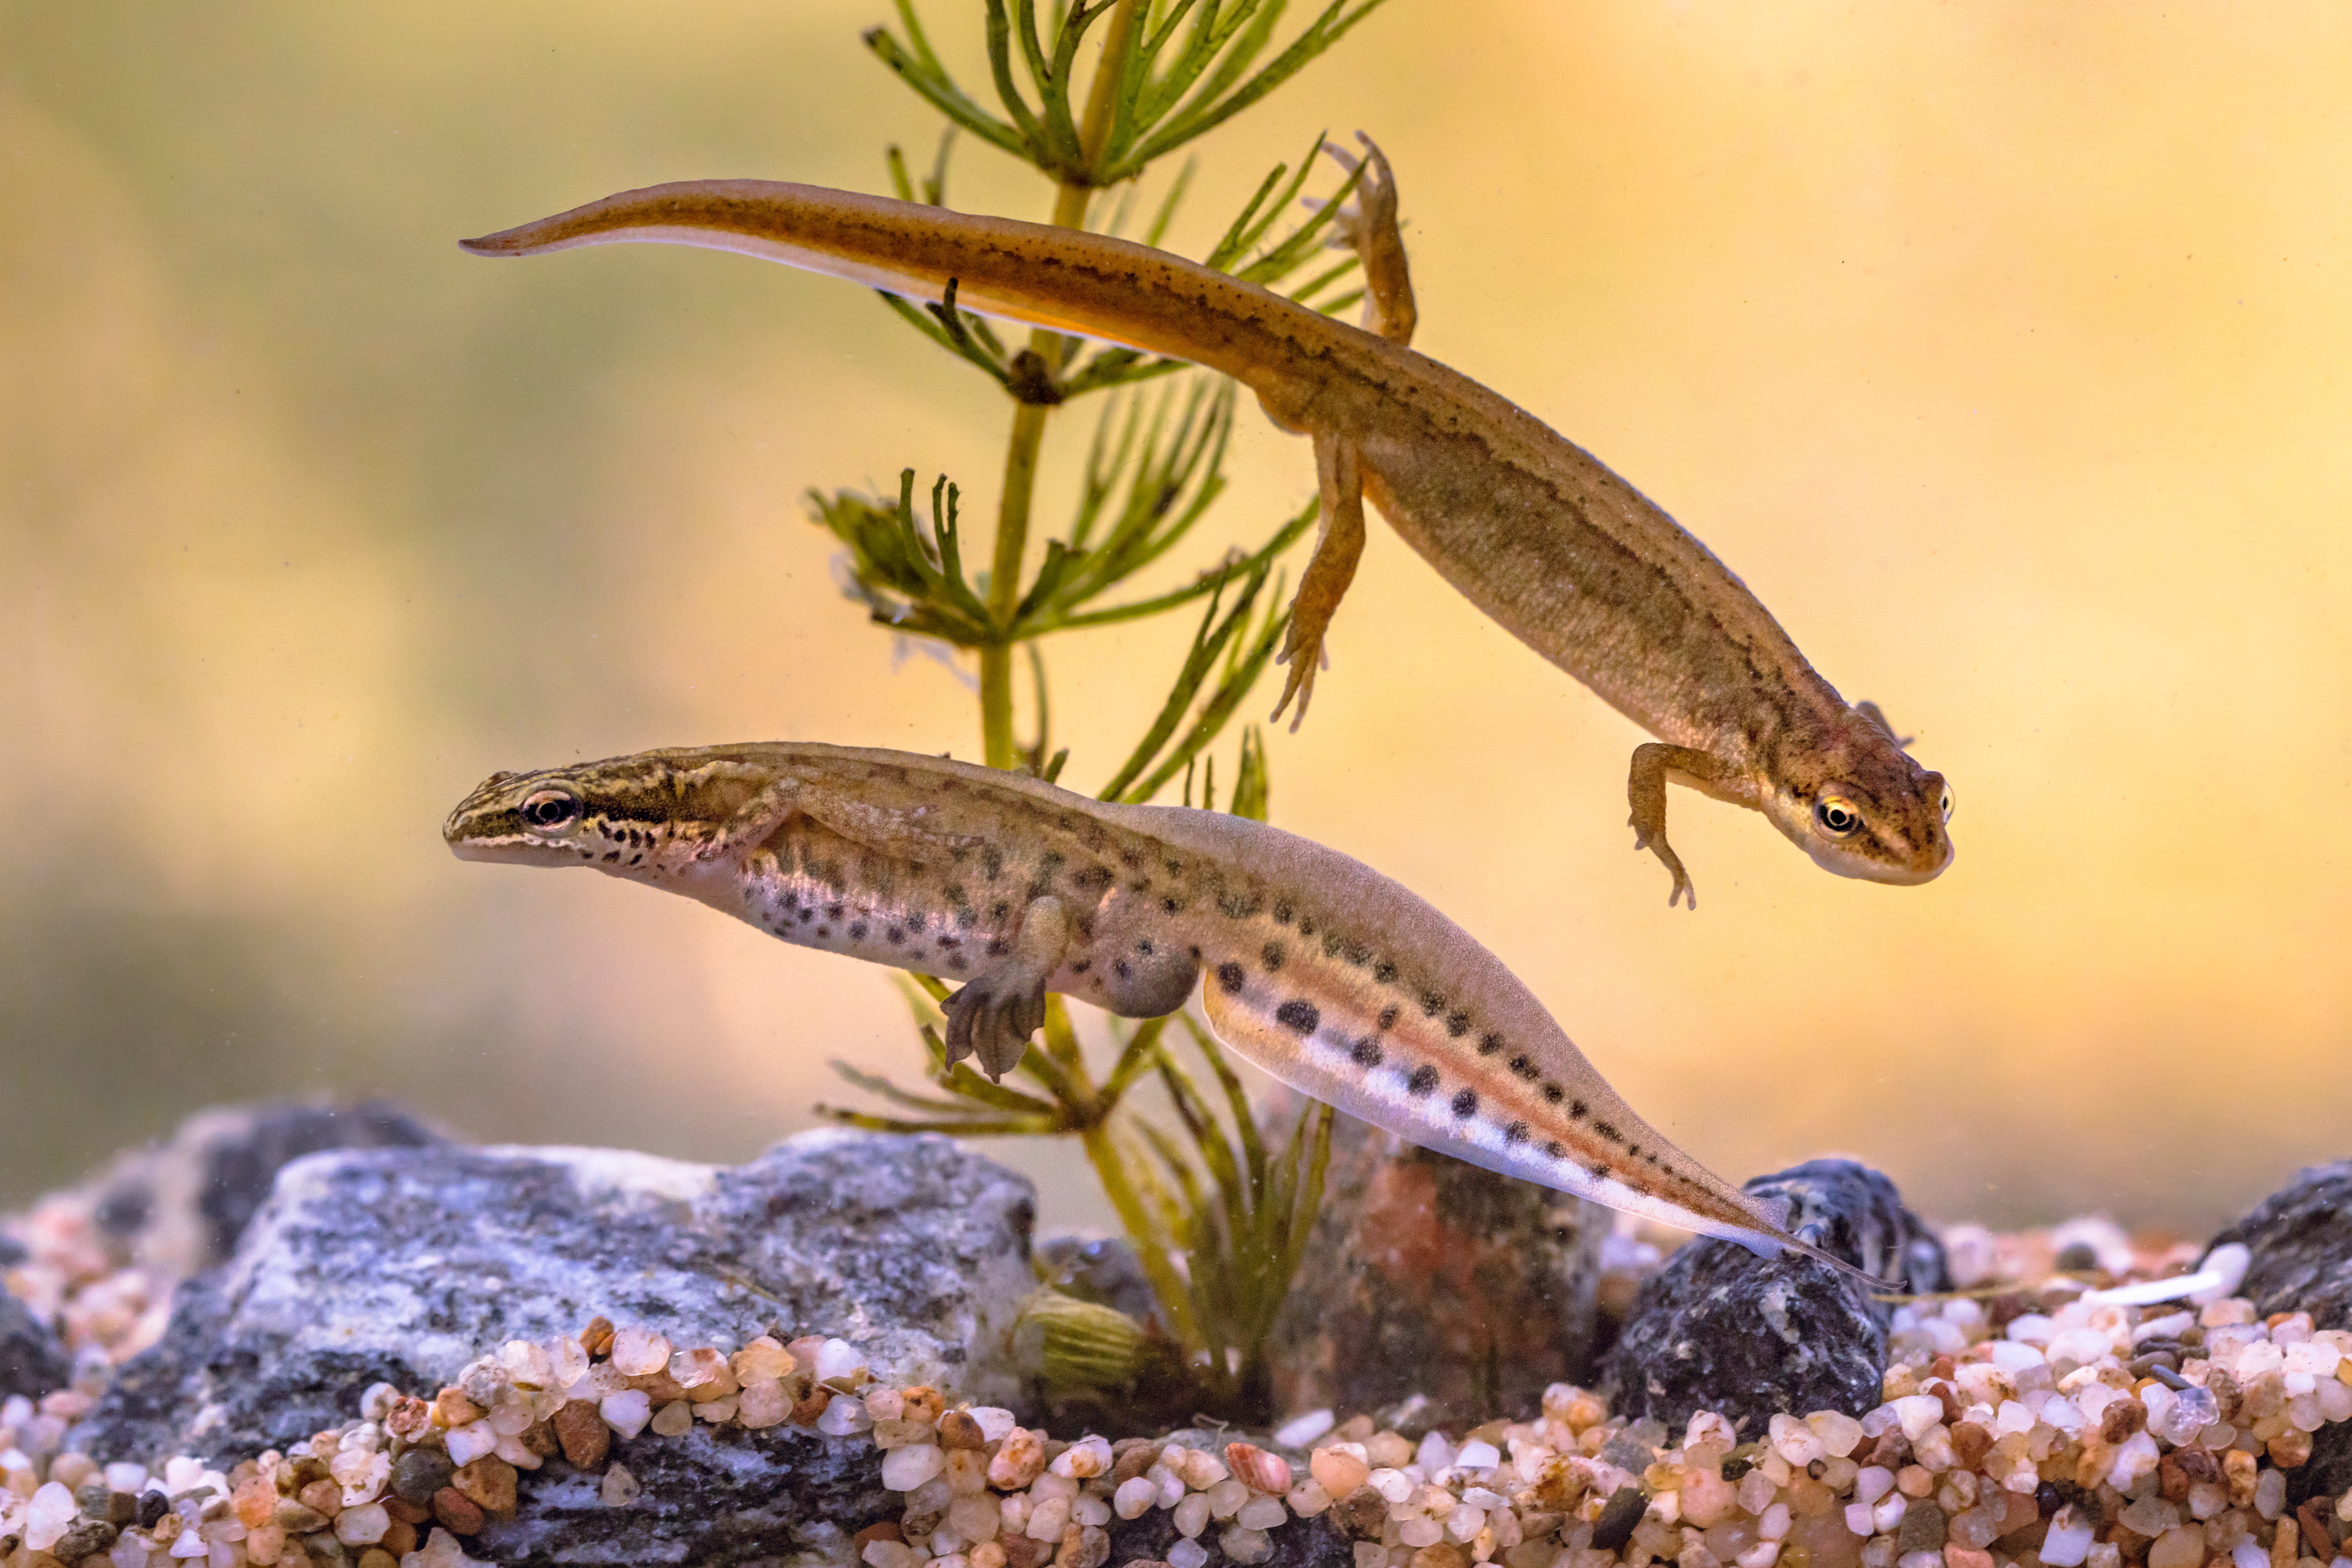 Newts ability to recall limbs was not previously well understood